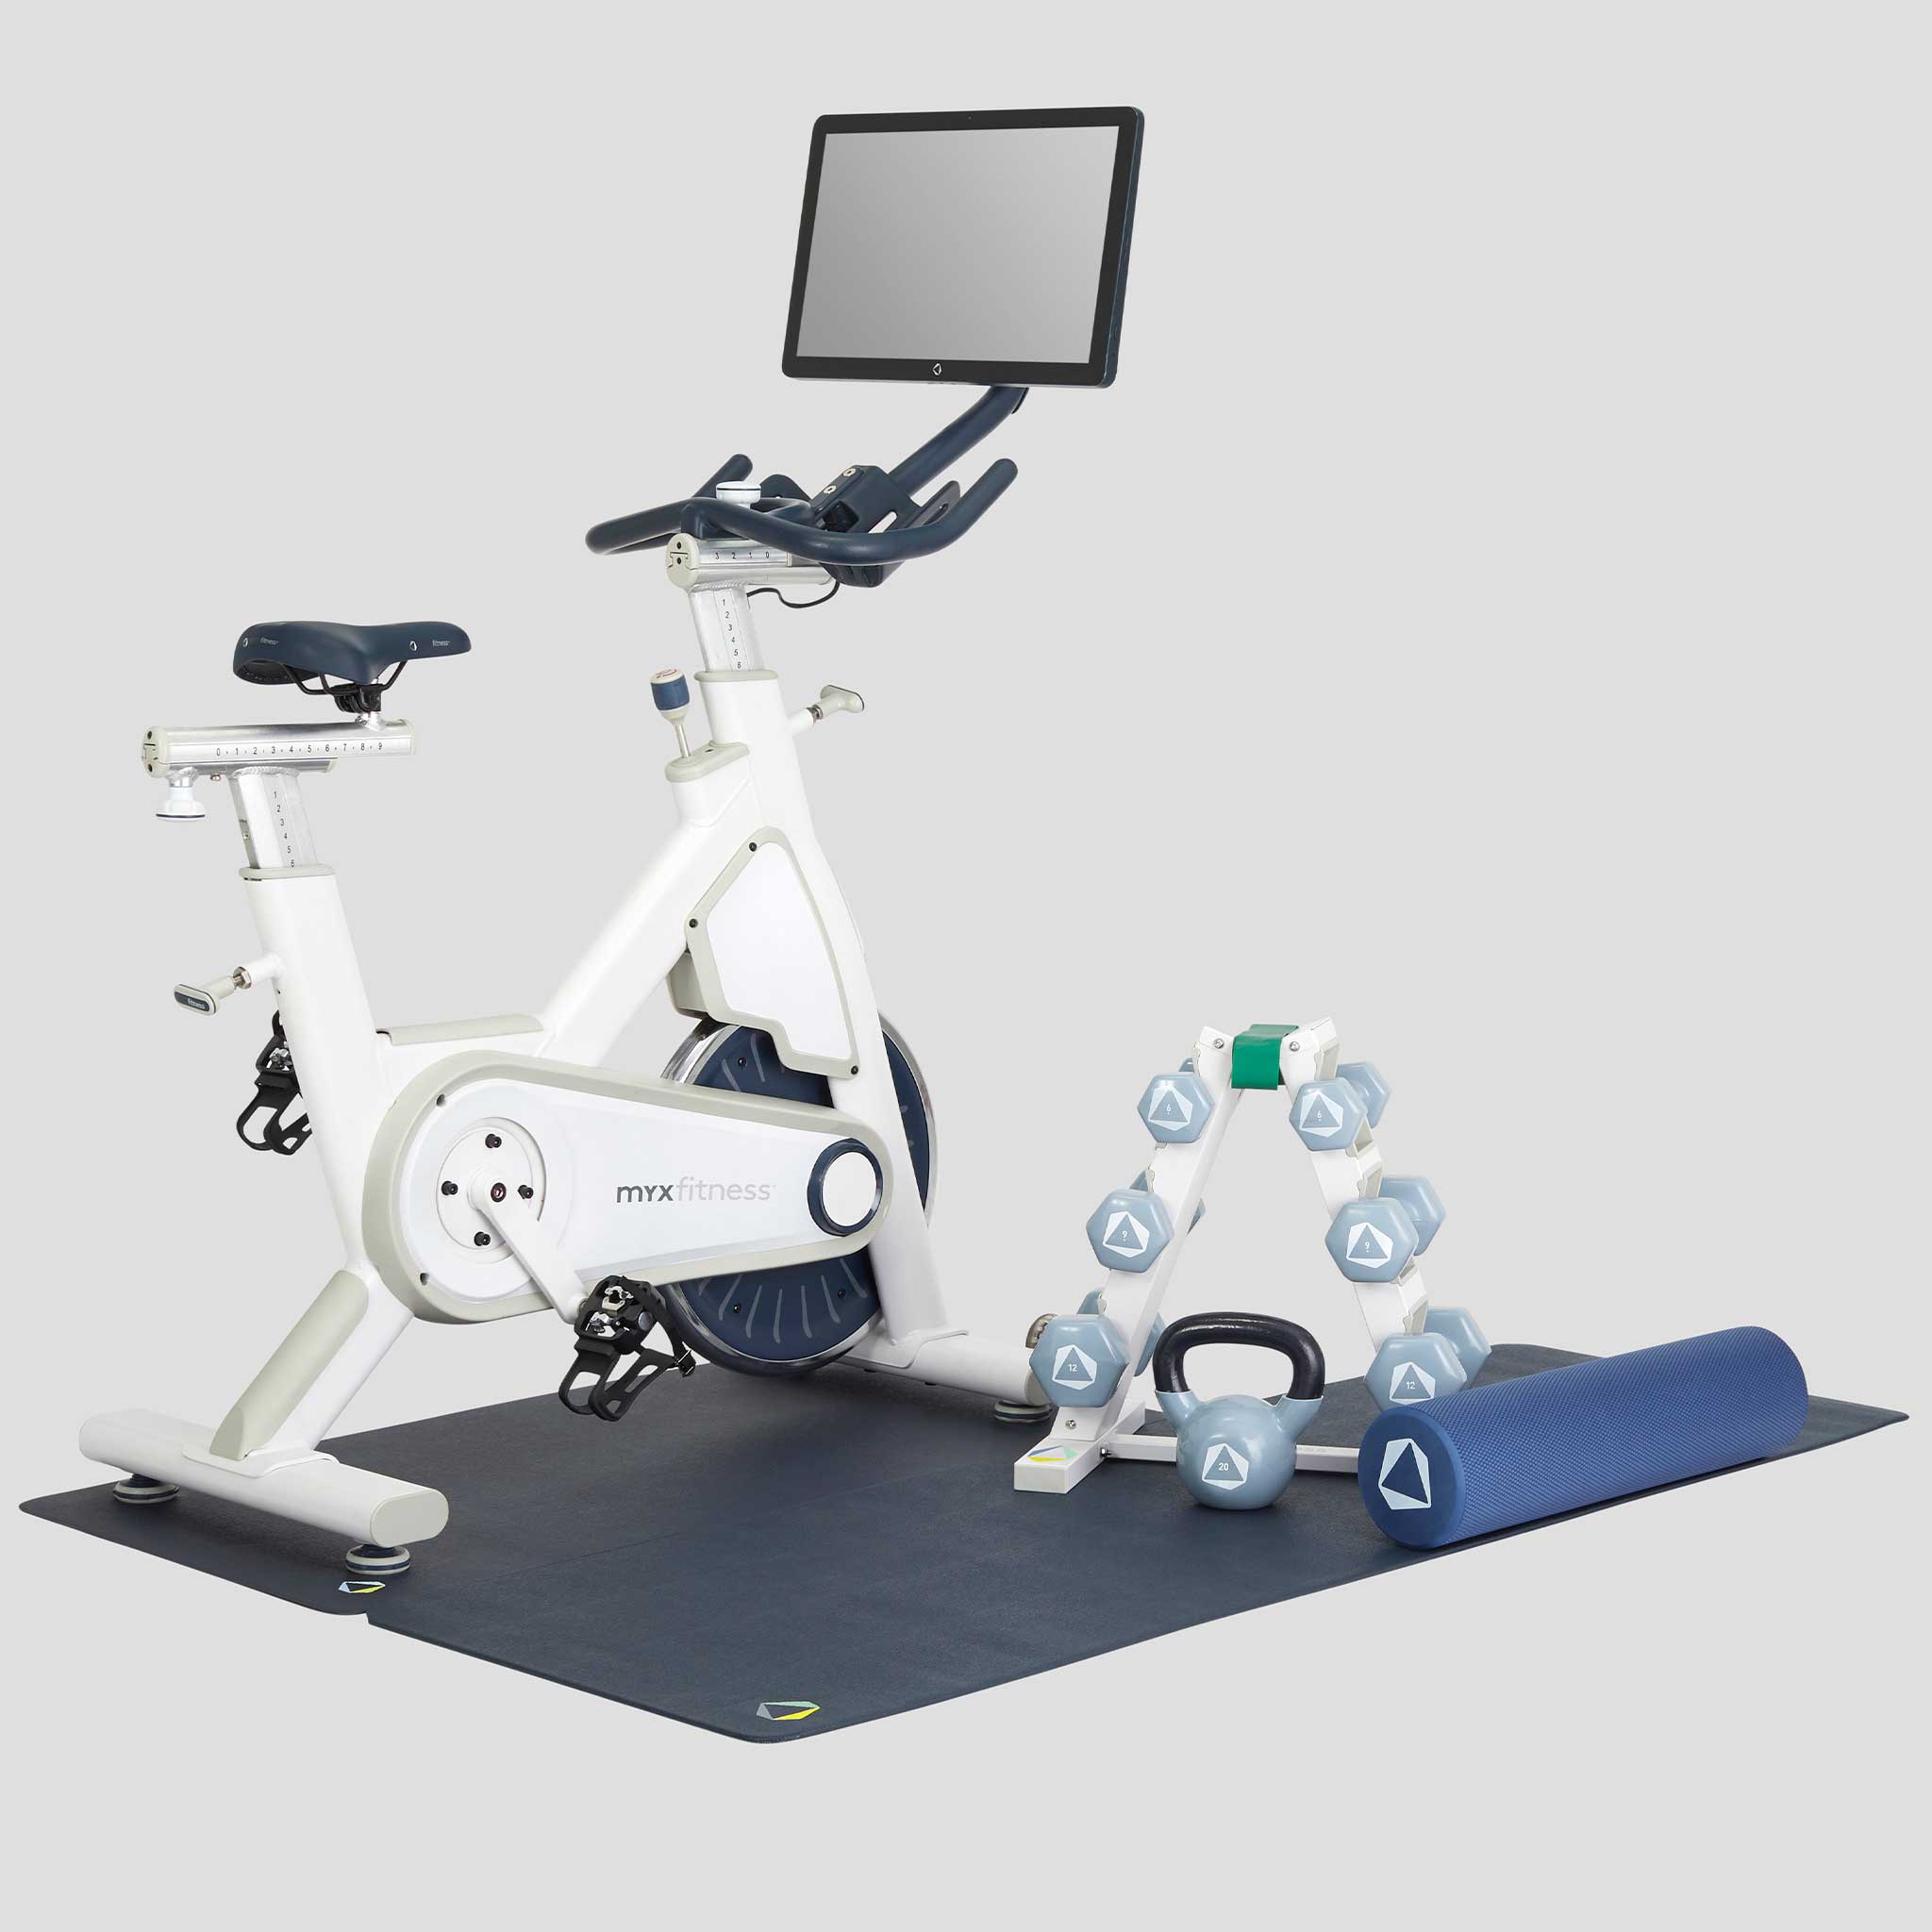 The MYX II Plus Home Studio in Natural White with weight rack, foam roller, spri stretch band, kettlebell and floor mats